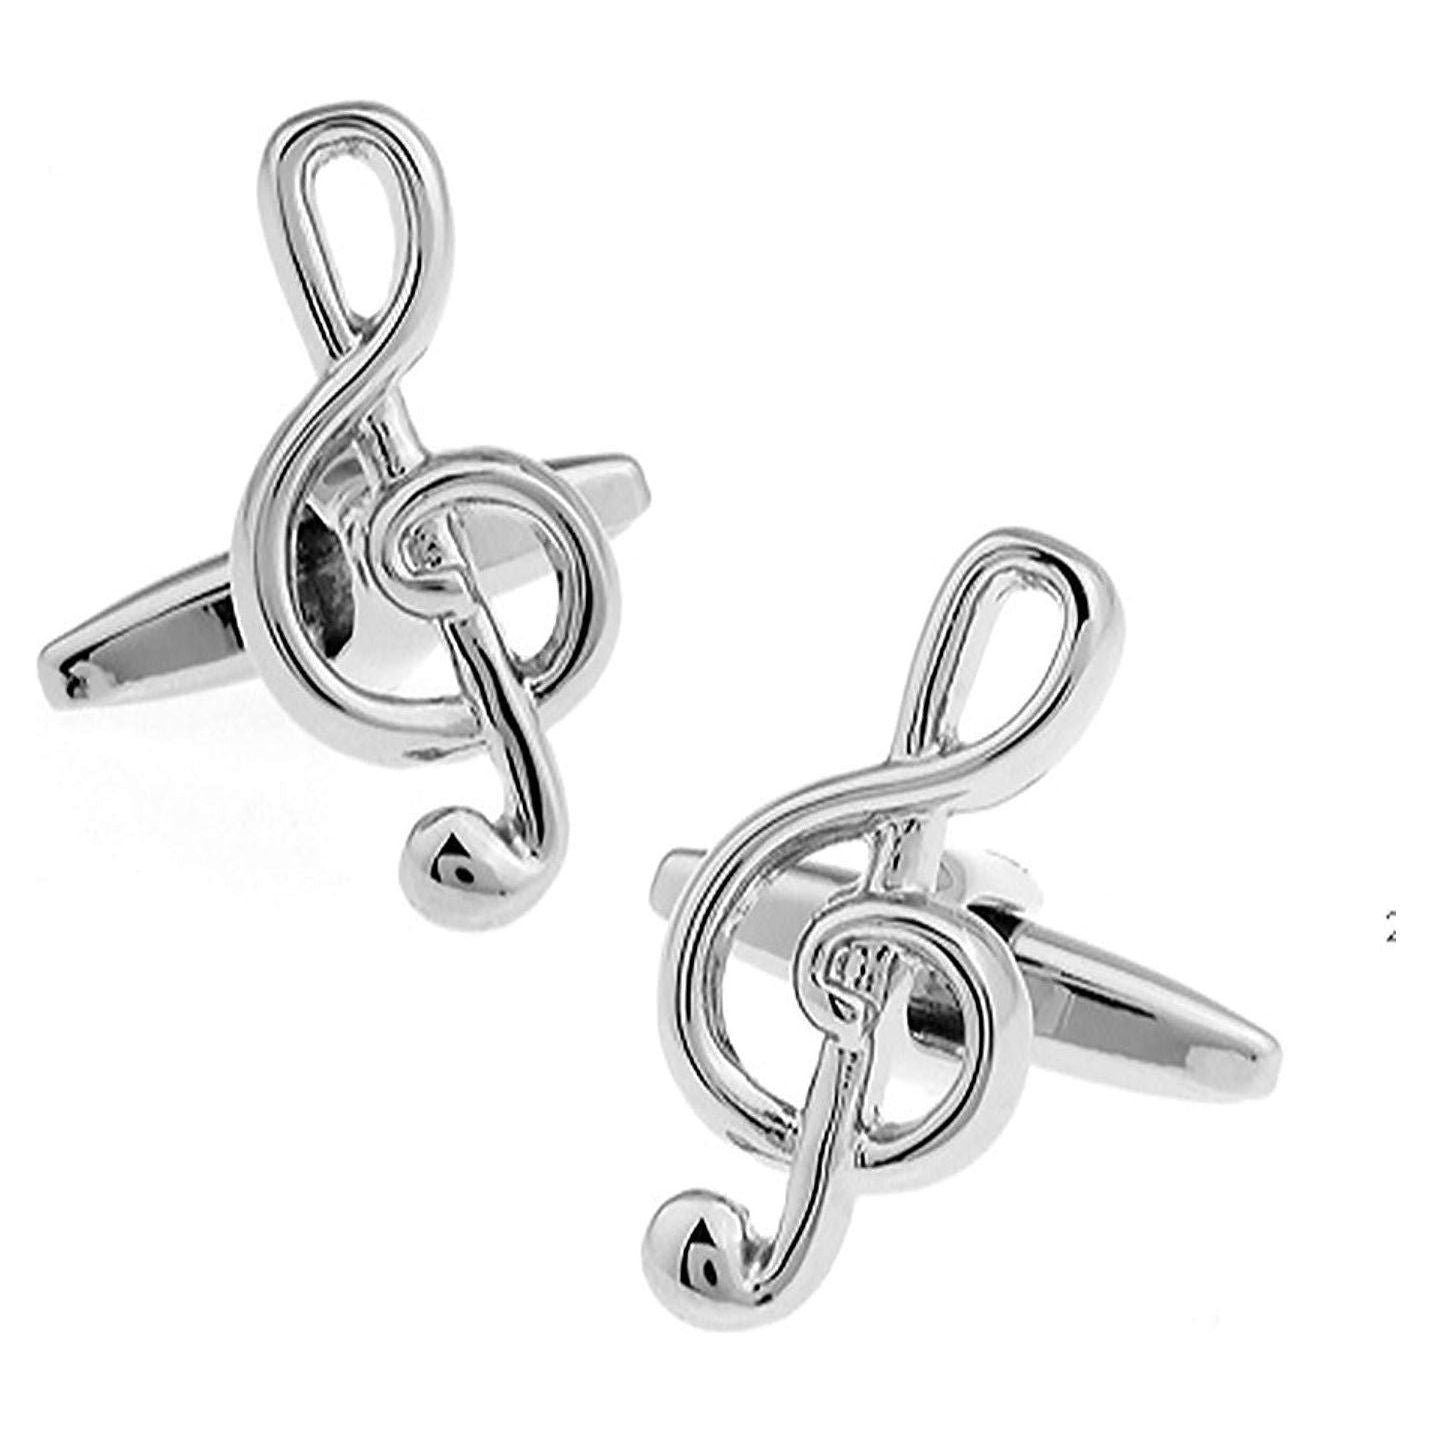 Treble Clef Musical Note Cufflinks - Ashton and Finch